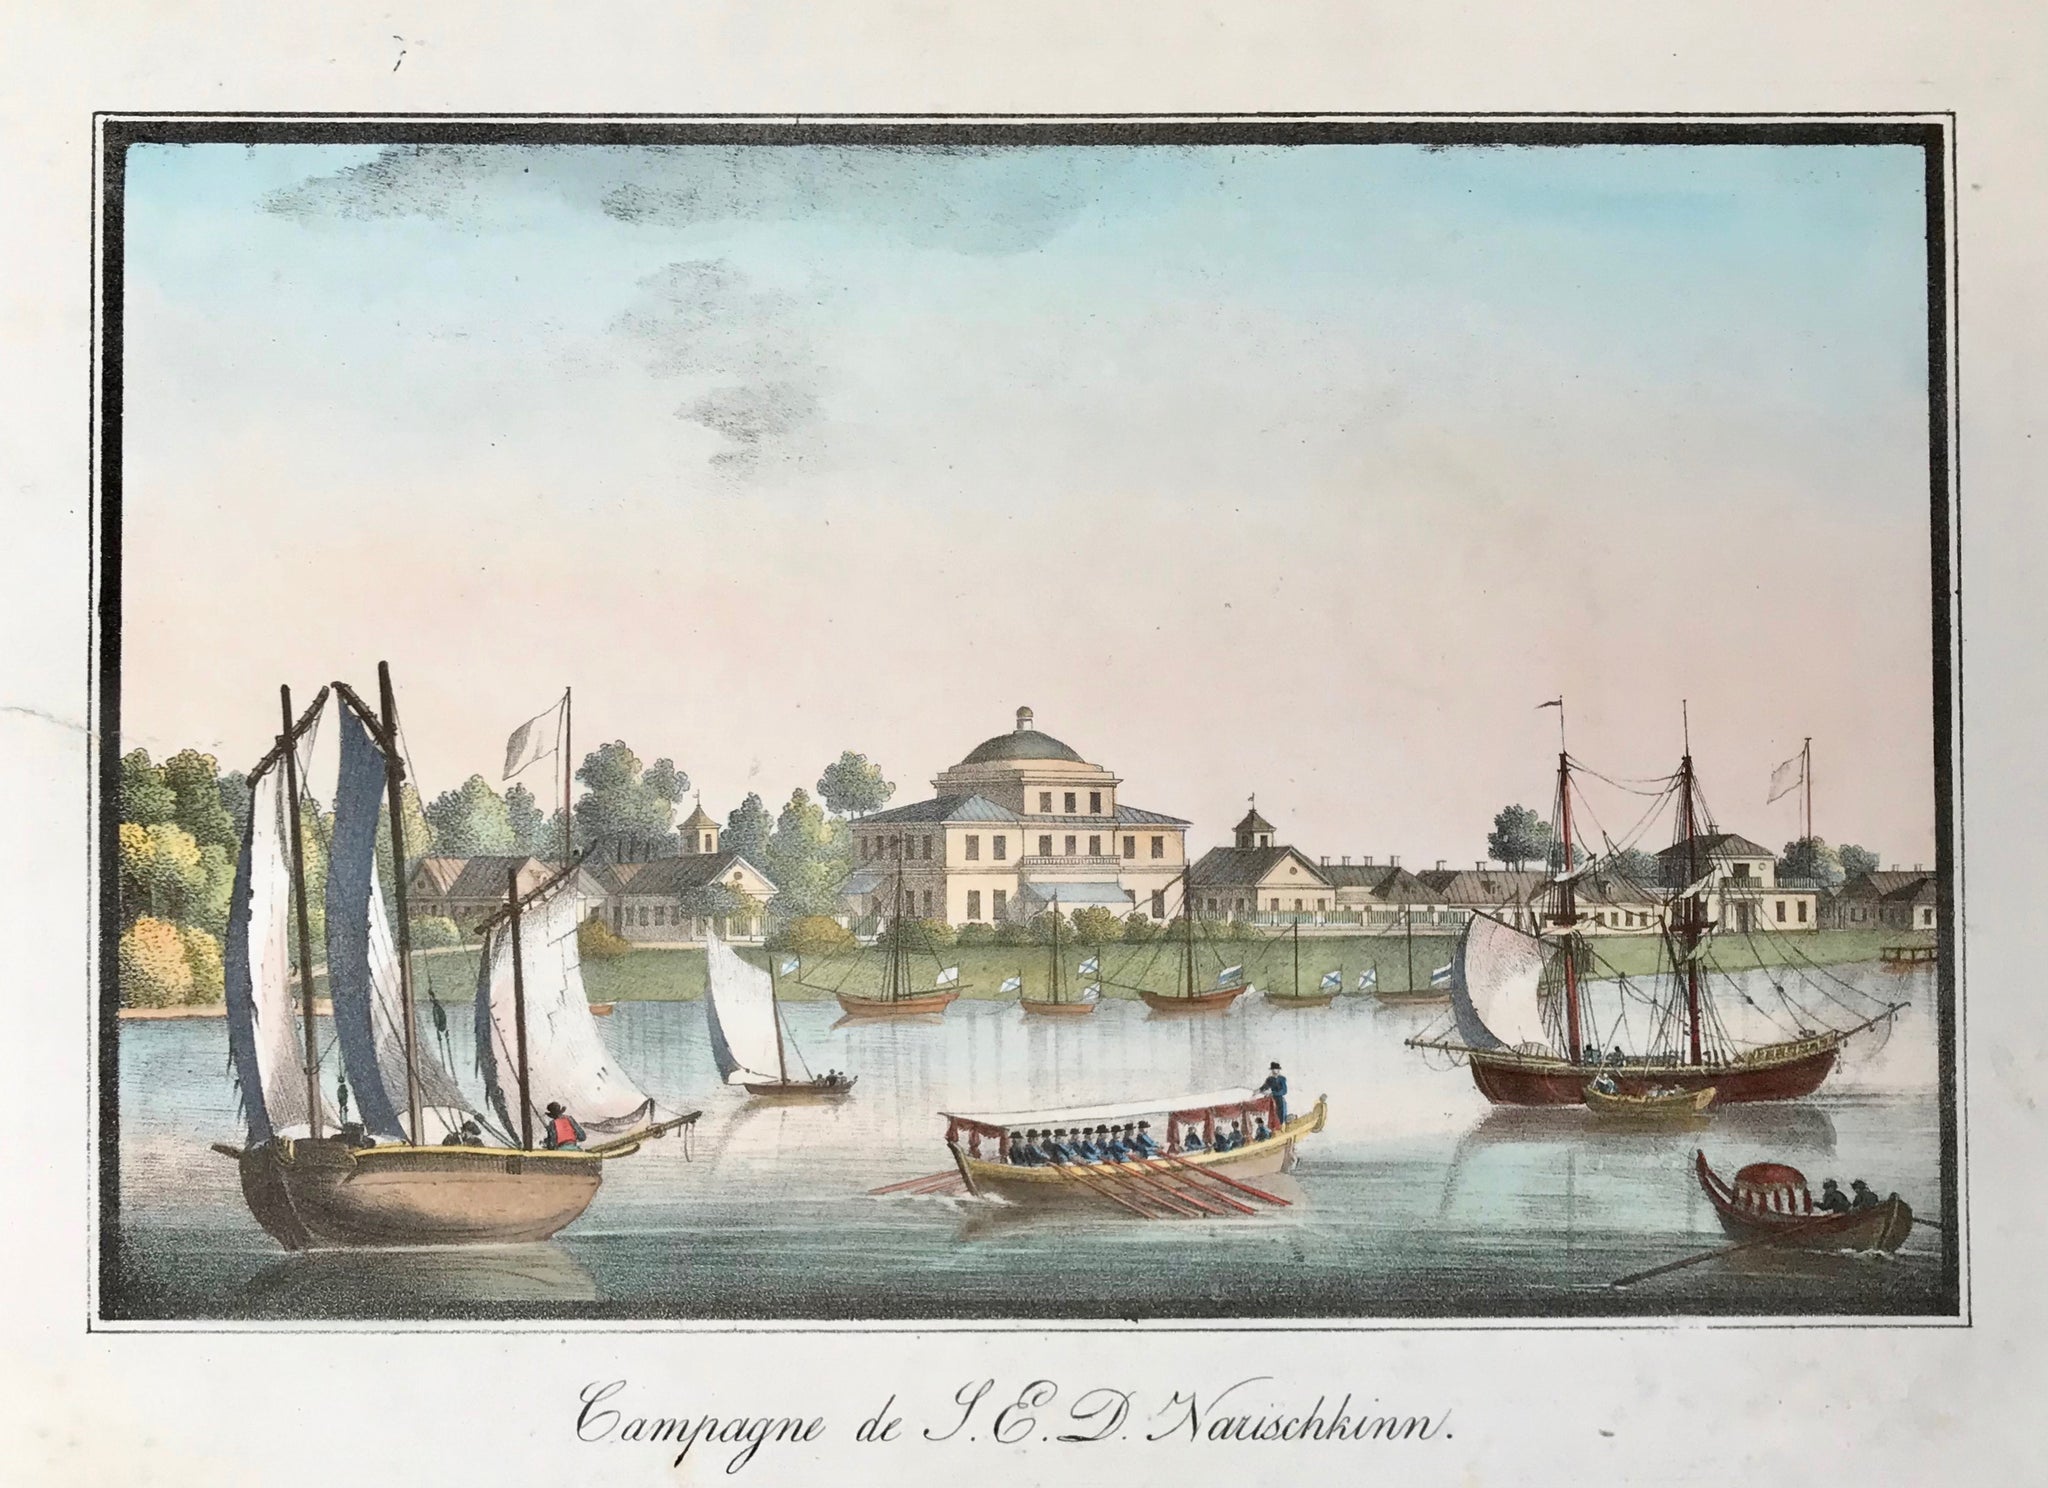 Russia, St. Petersburg. - "Campagne de S.E.D. Narischkinn"  Anonymous lithograph ca 1850. Original attractive hand coloring.  In the middle of the left margin is a repaired tear reaching 1 centimeter into the image.